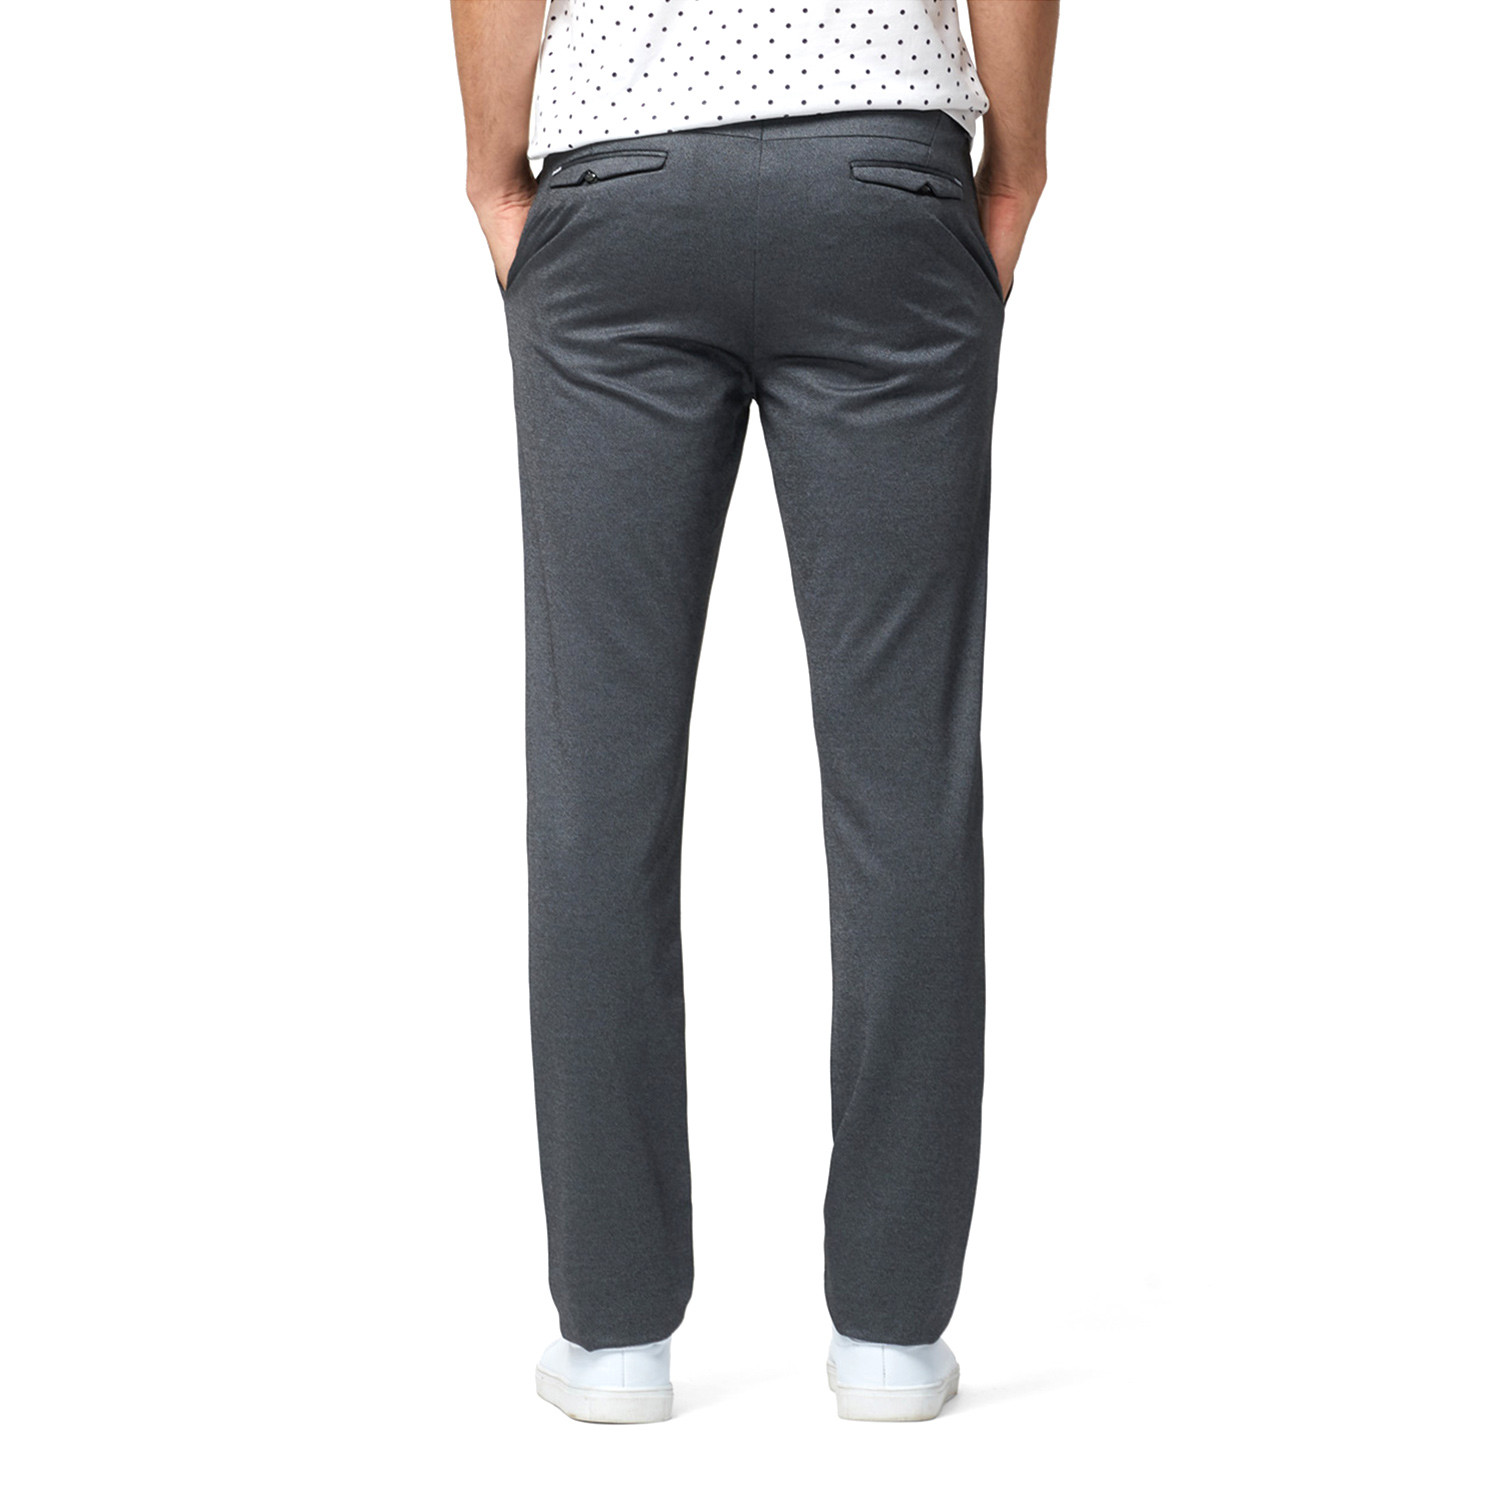 Classic Dress Pant // Light Grey (28WX41L) - QZHIHE - Touch of Modern